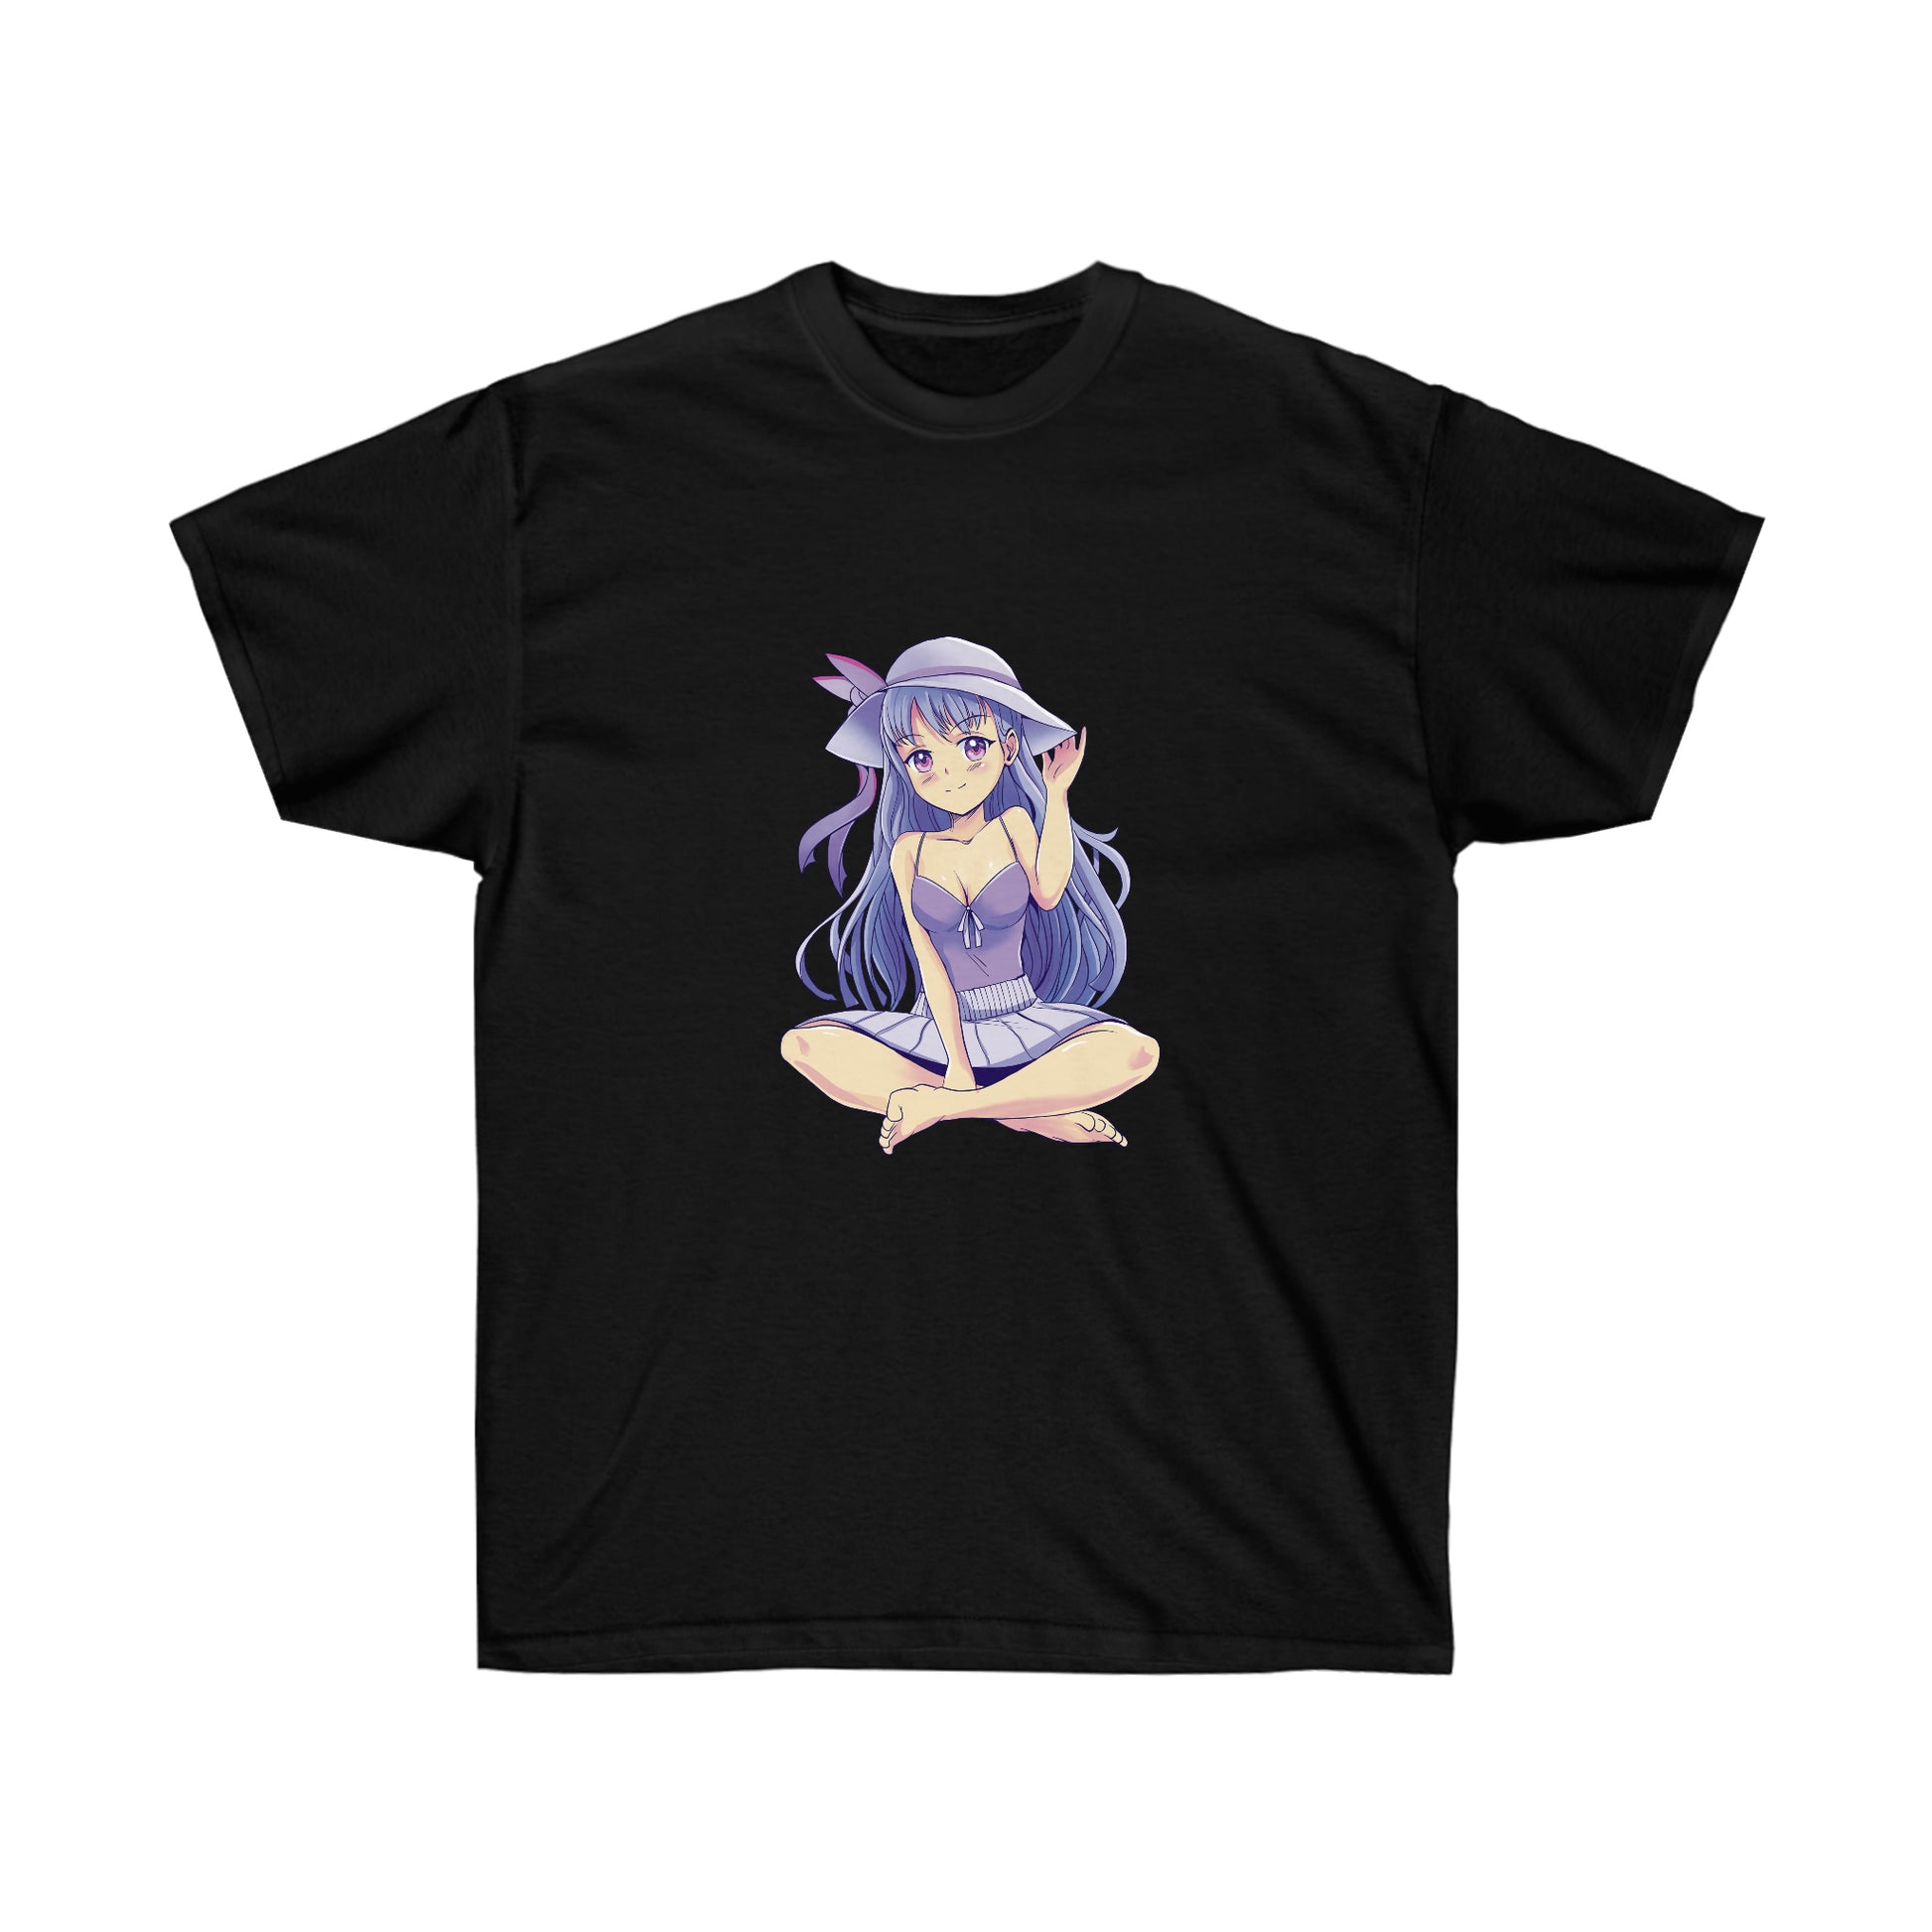 Graphic T-Shirt: Cute Anime Girl In Summer Outfit – Graphic T's For Me